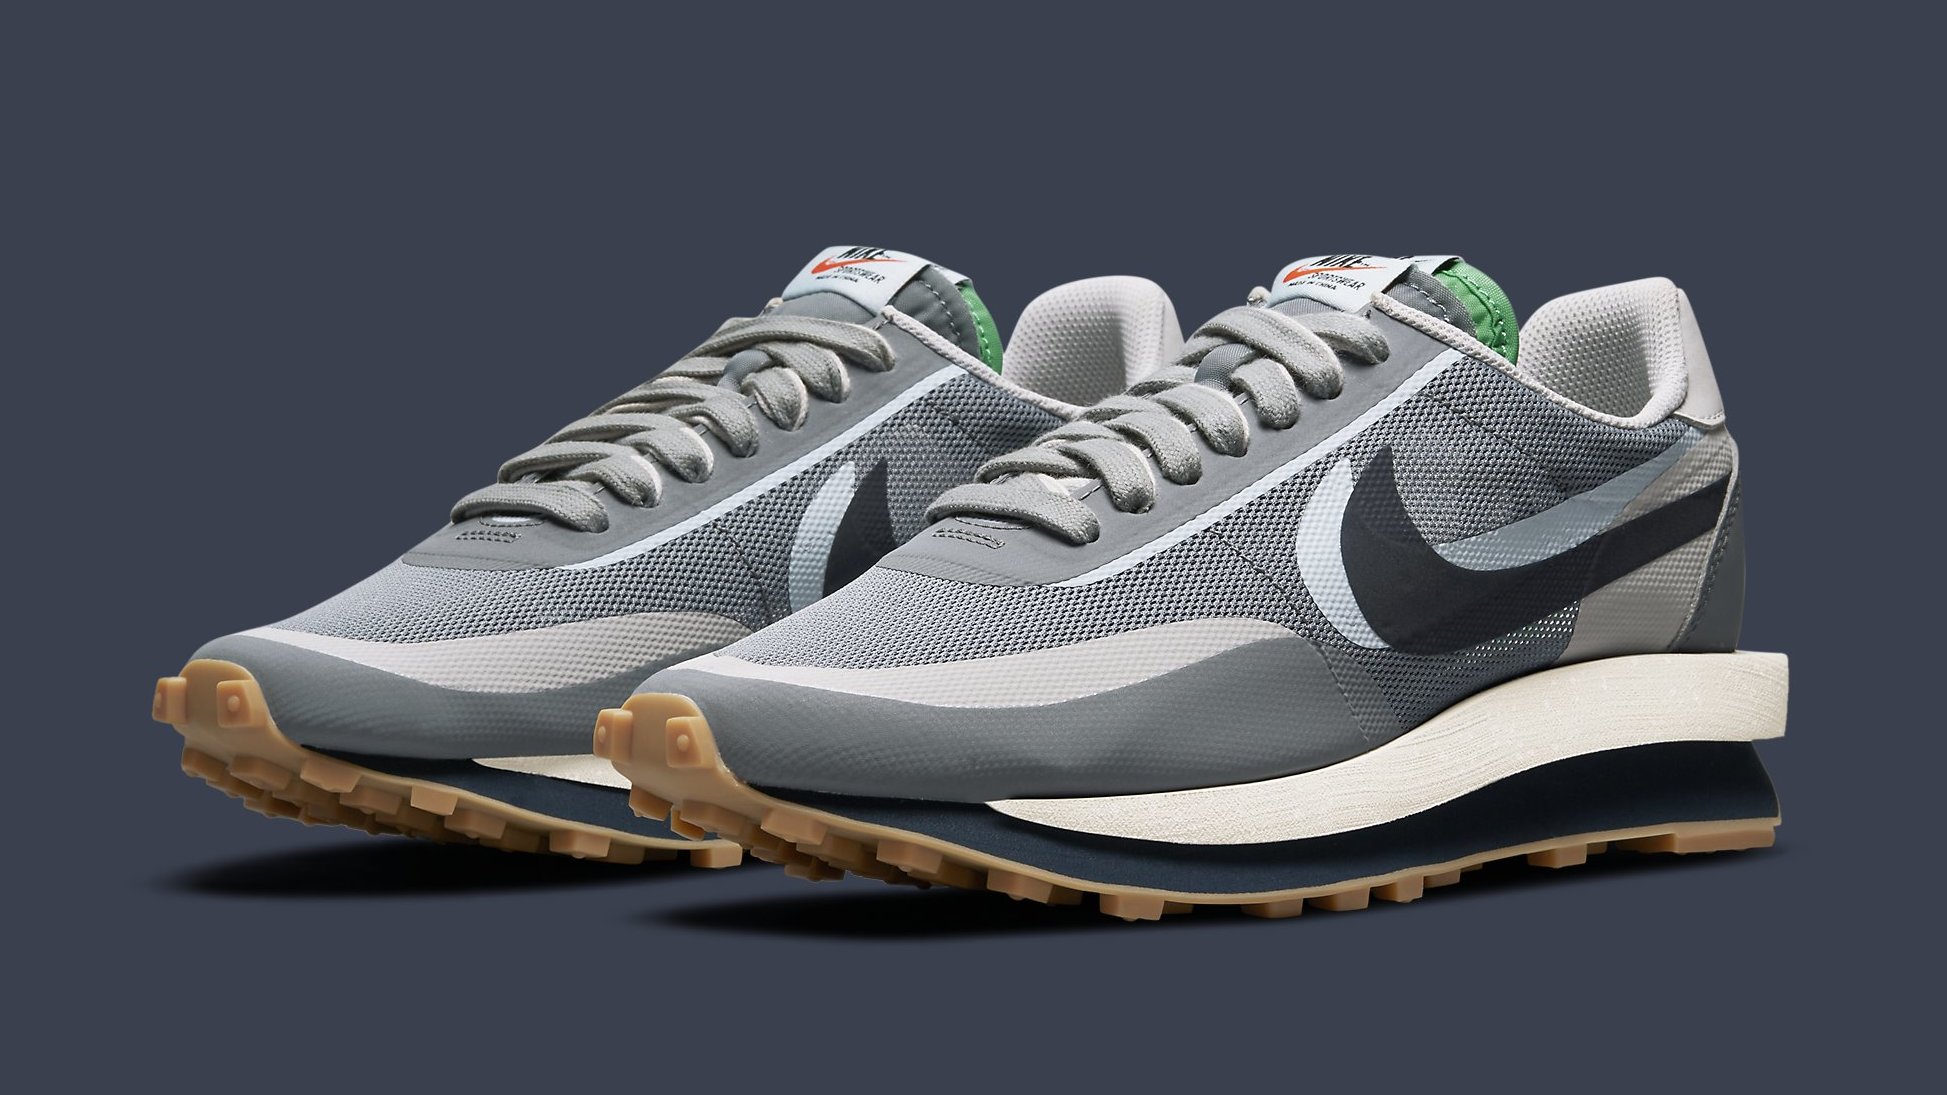 Clot x Sacai x Nike LDWaffle Grey Kiss of Death 2 Release Date DH3114-001 |  Sole Collector